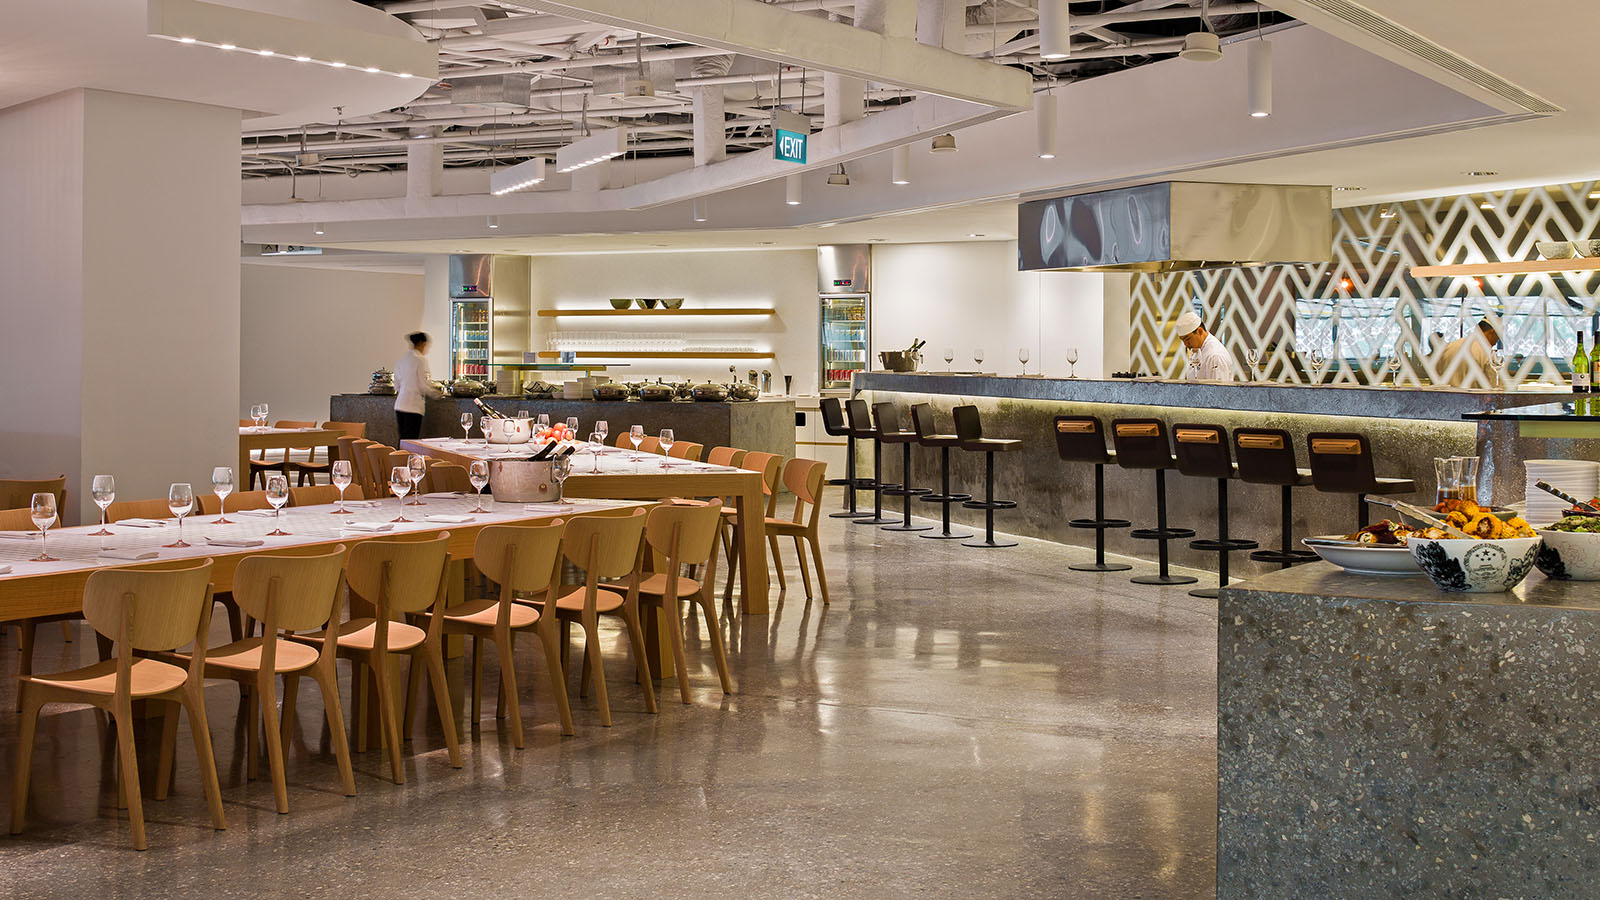 Dining wing at the Qantas International Business Lounge in Singapore